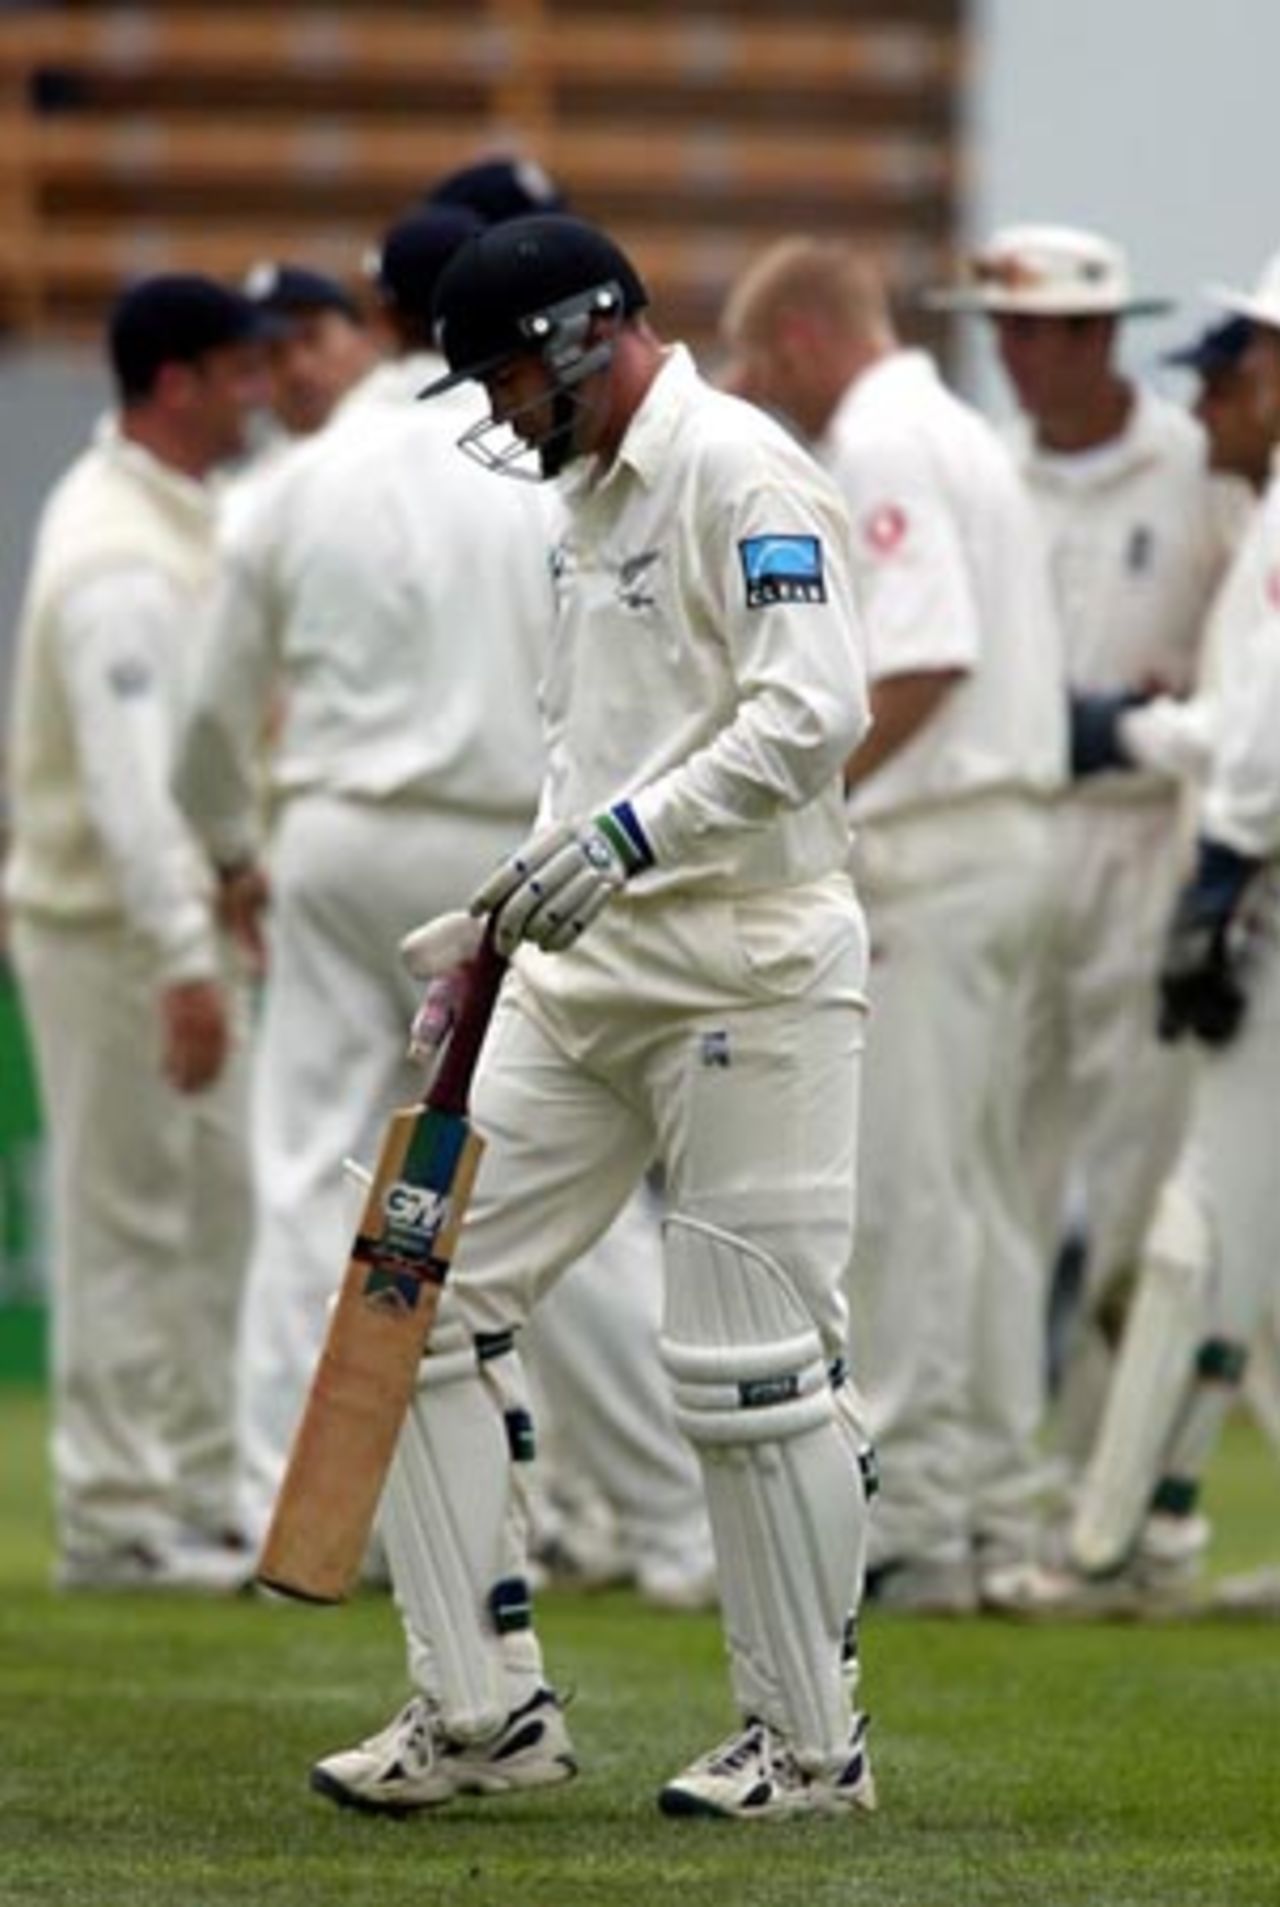 New Zealand batsman Matt Horne leaves the field after being dismissed by England bowler Matthew Hoggard for 14. England players celebrate in the background. 1st Test: New Zealand v England at Jade Stadium, Christchurch, 13-17 March 2002 (14 March 2002).